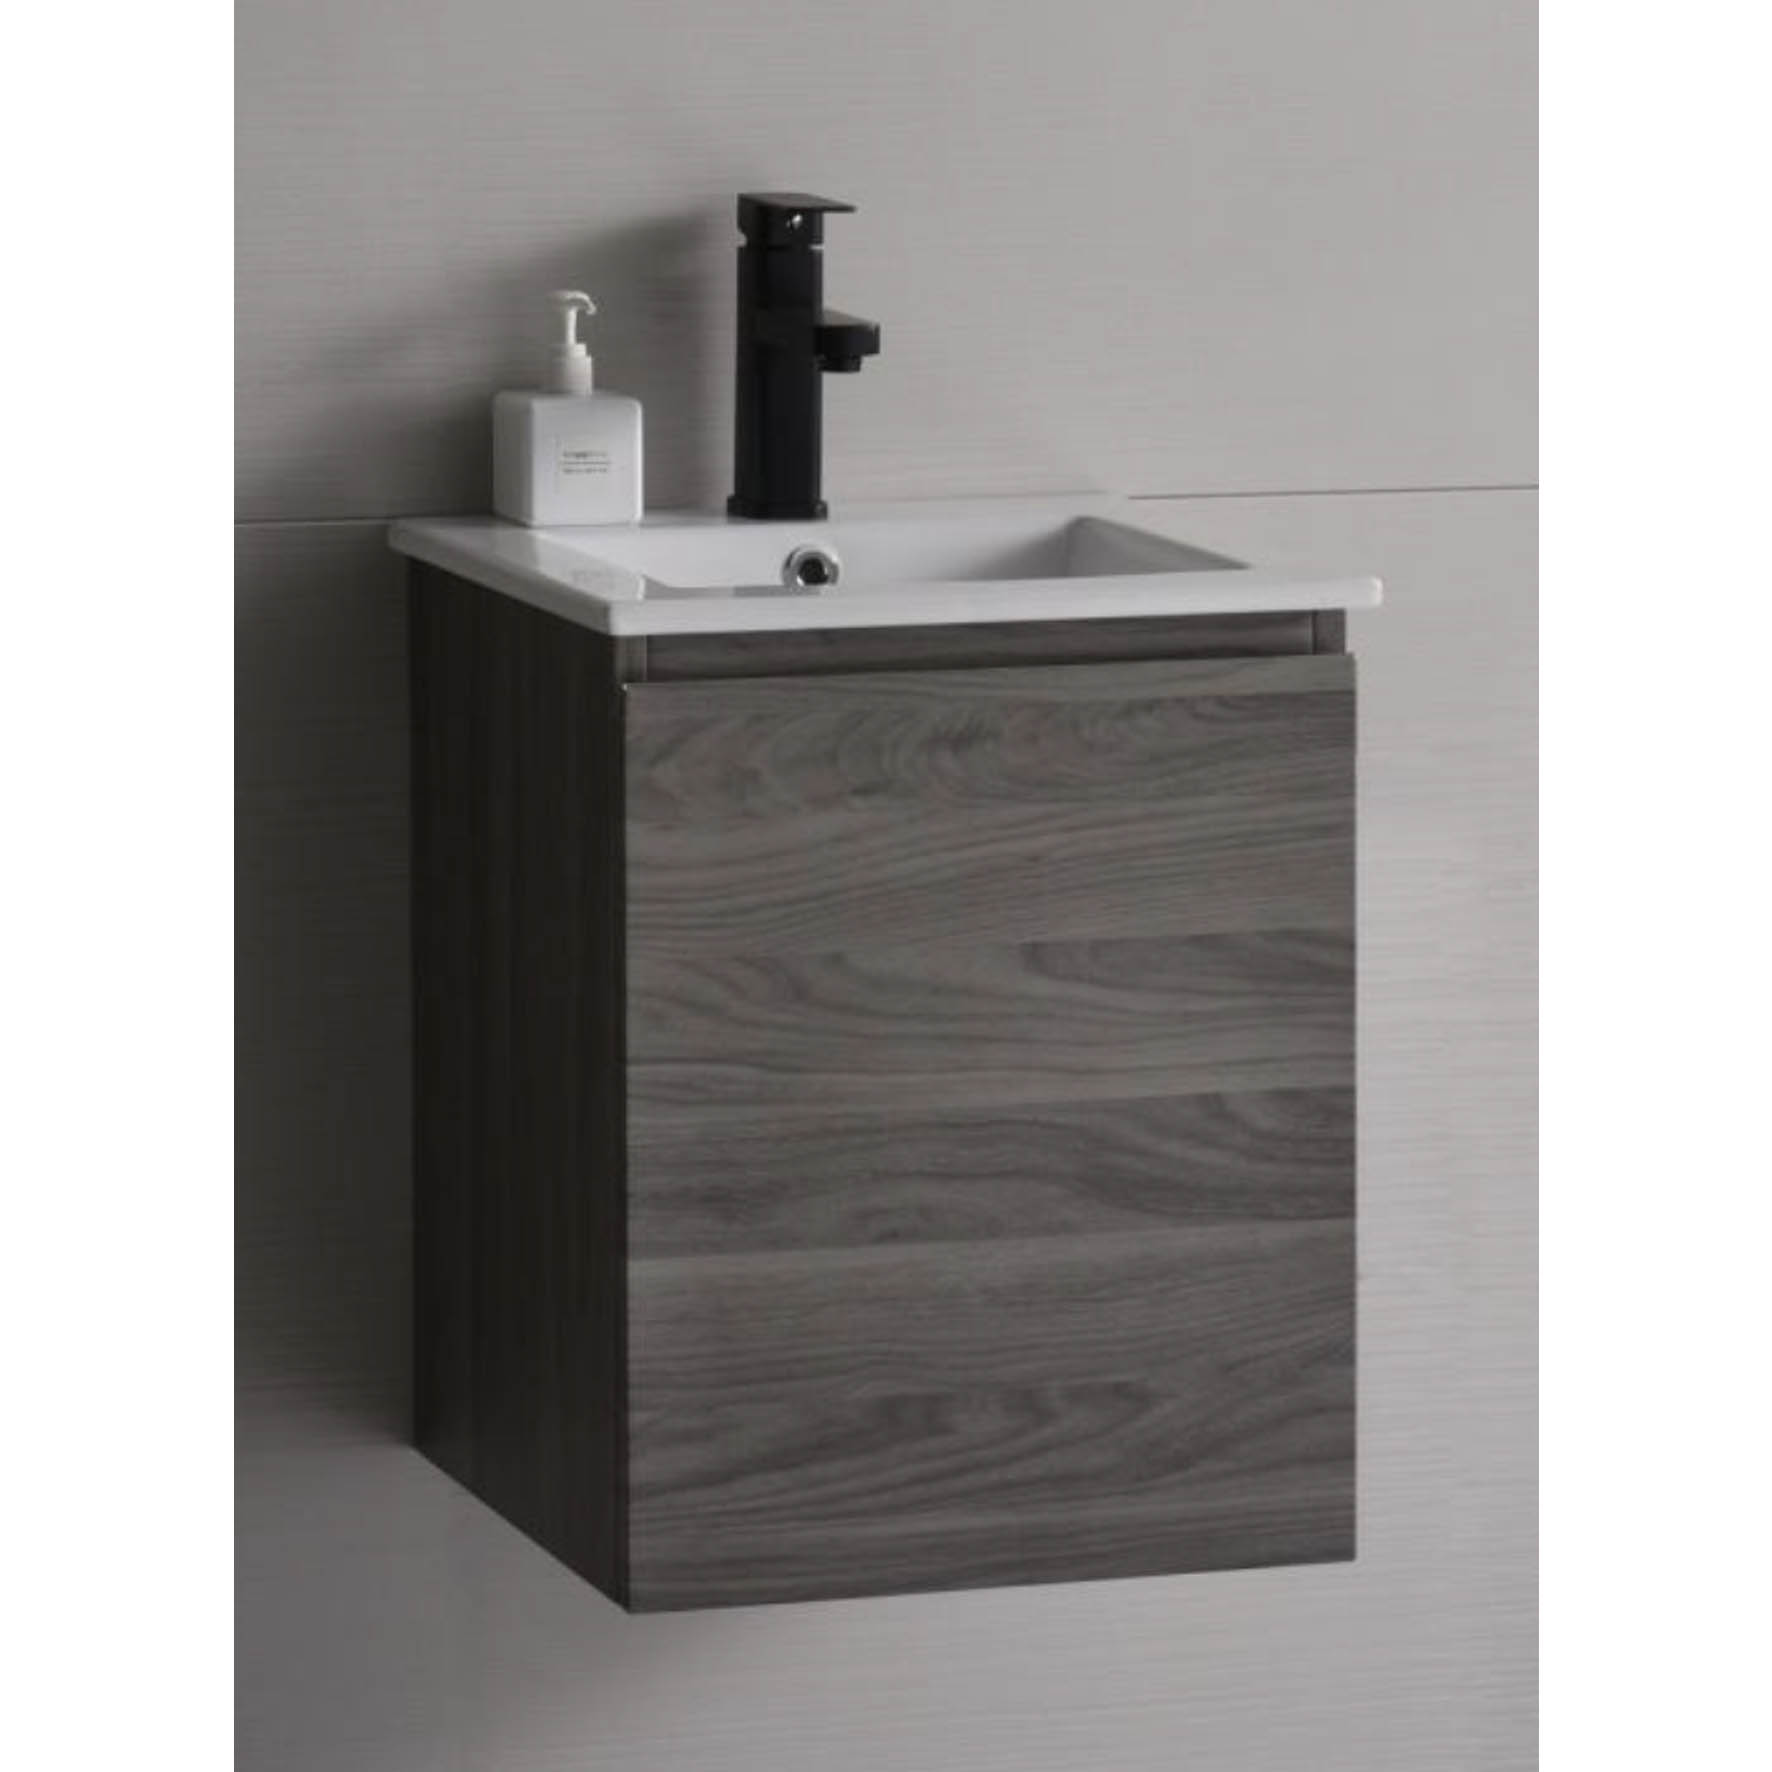 Baron – Stainless Steel Vanity Cabinet with Built-In Basin – A106-FPW